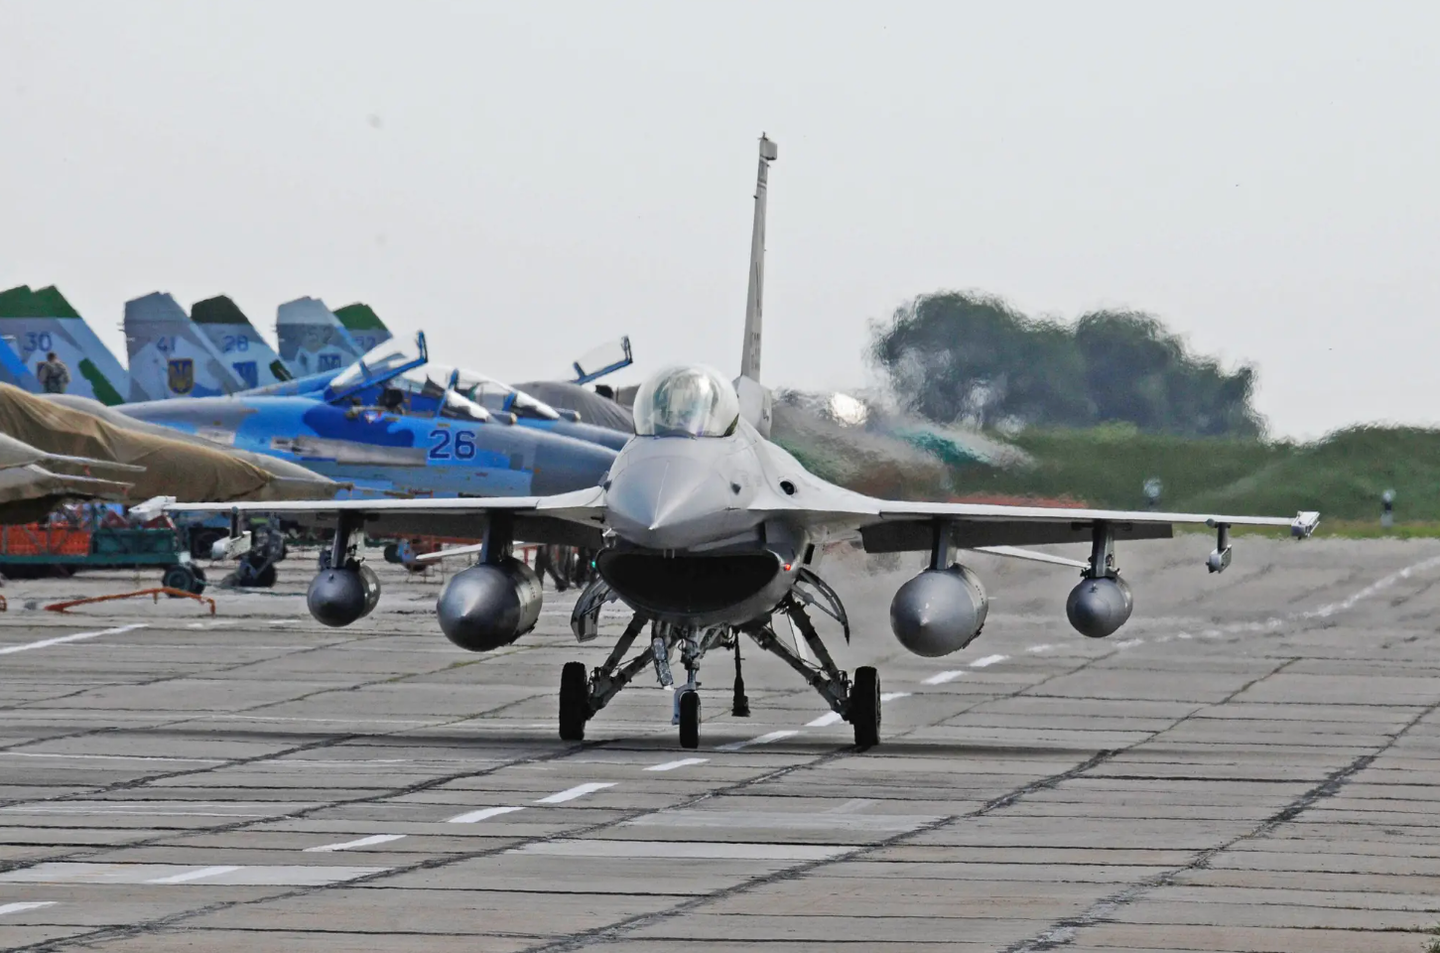 An Alabama Air National Guard F-16C taxies past Ukrainian Su-27 and MiG-29 fighter jets, on the ramp at Mirgorod Air Base, Ukraine, during an exercise in 2011.&nbsp;<em>U.S. Air Force</em><br>